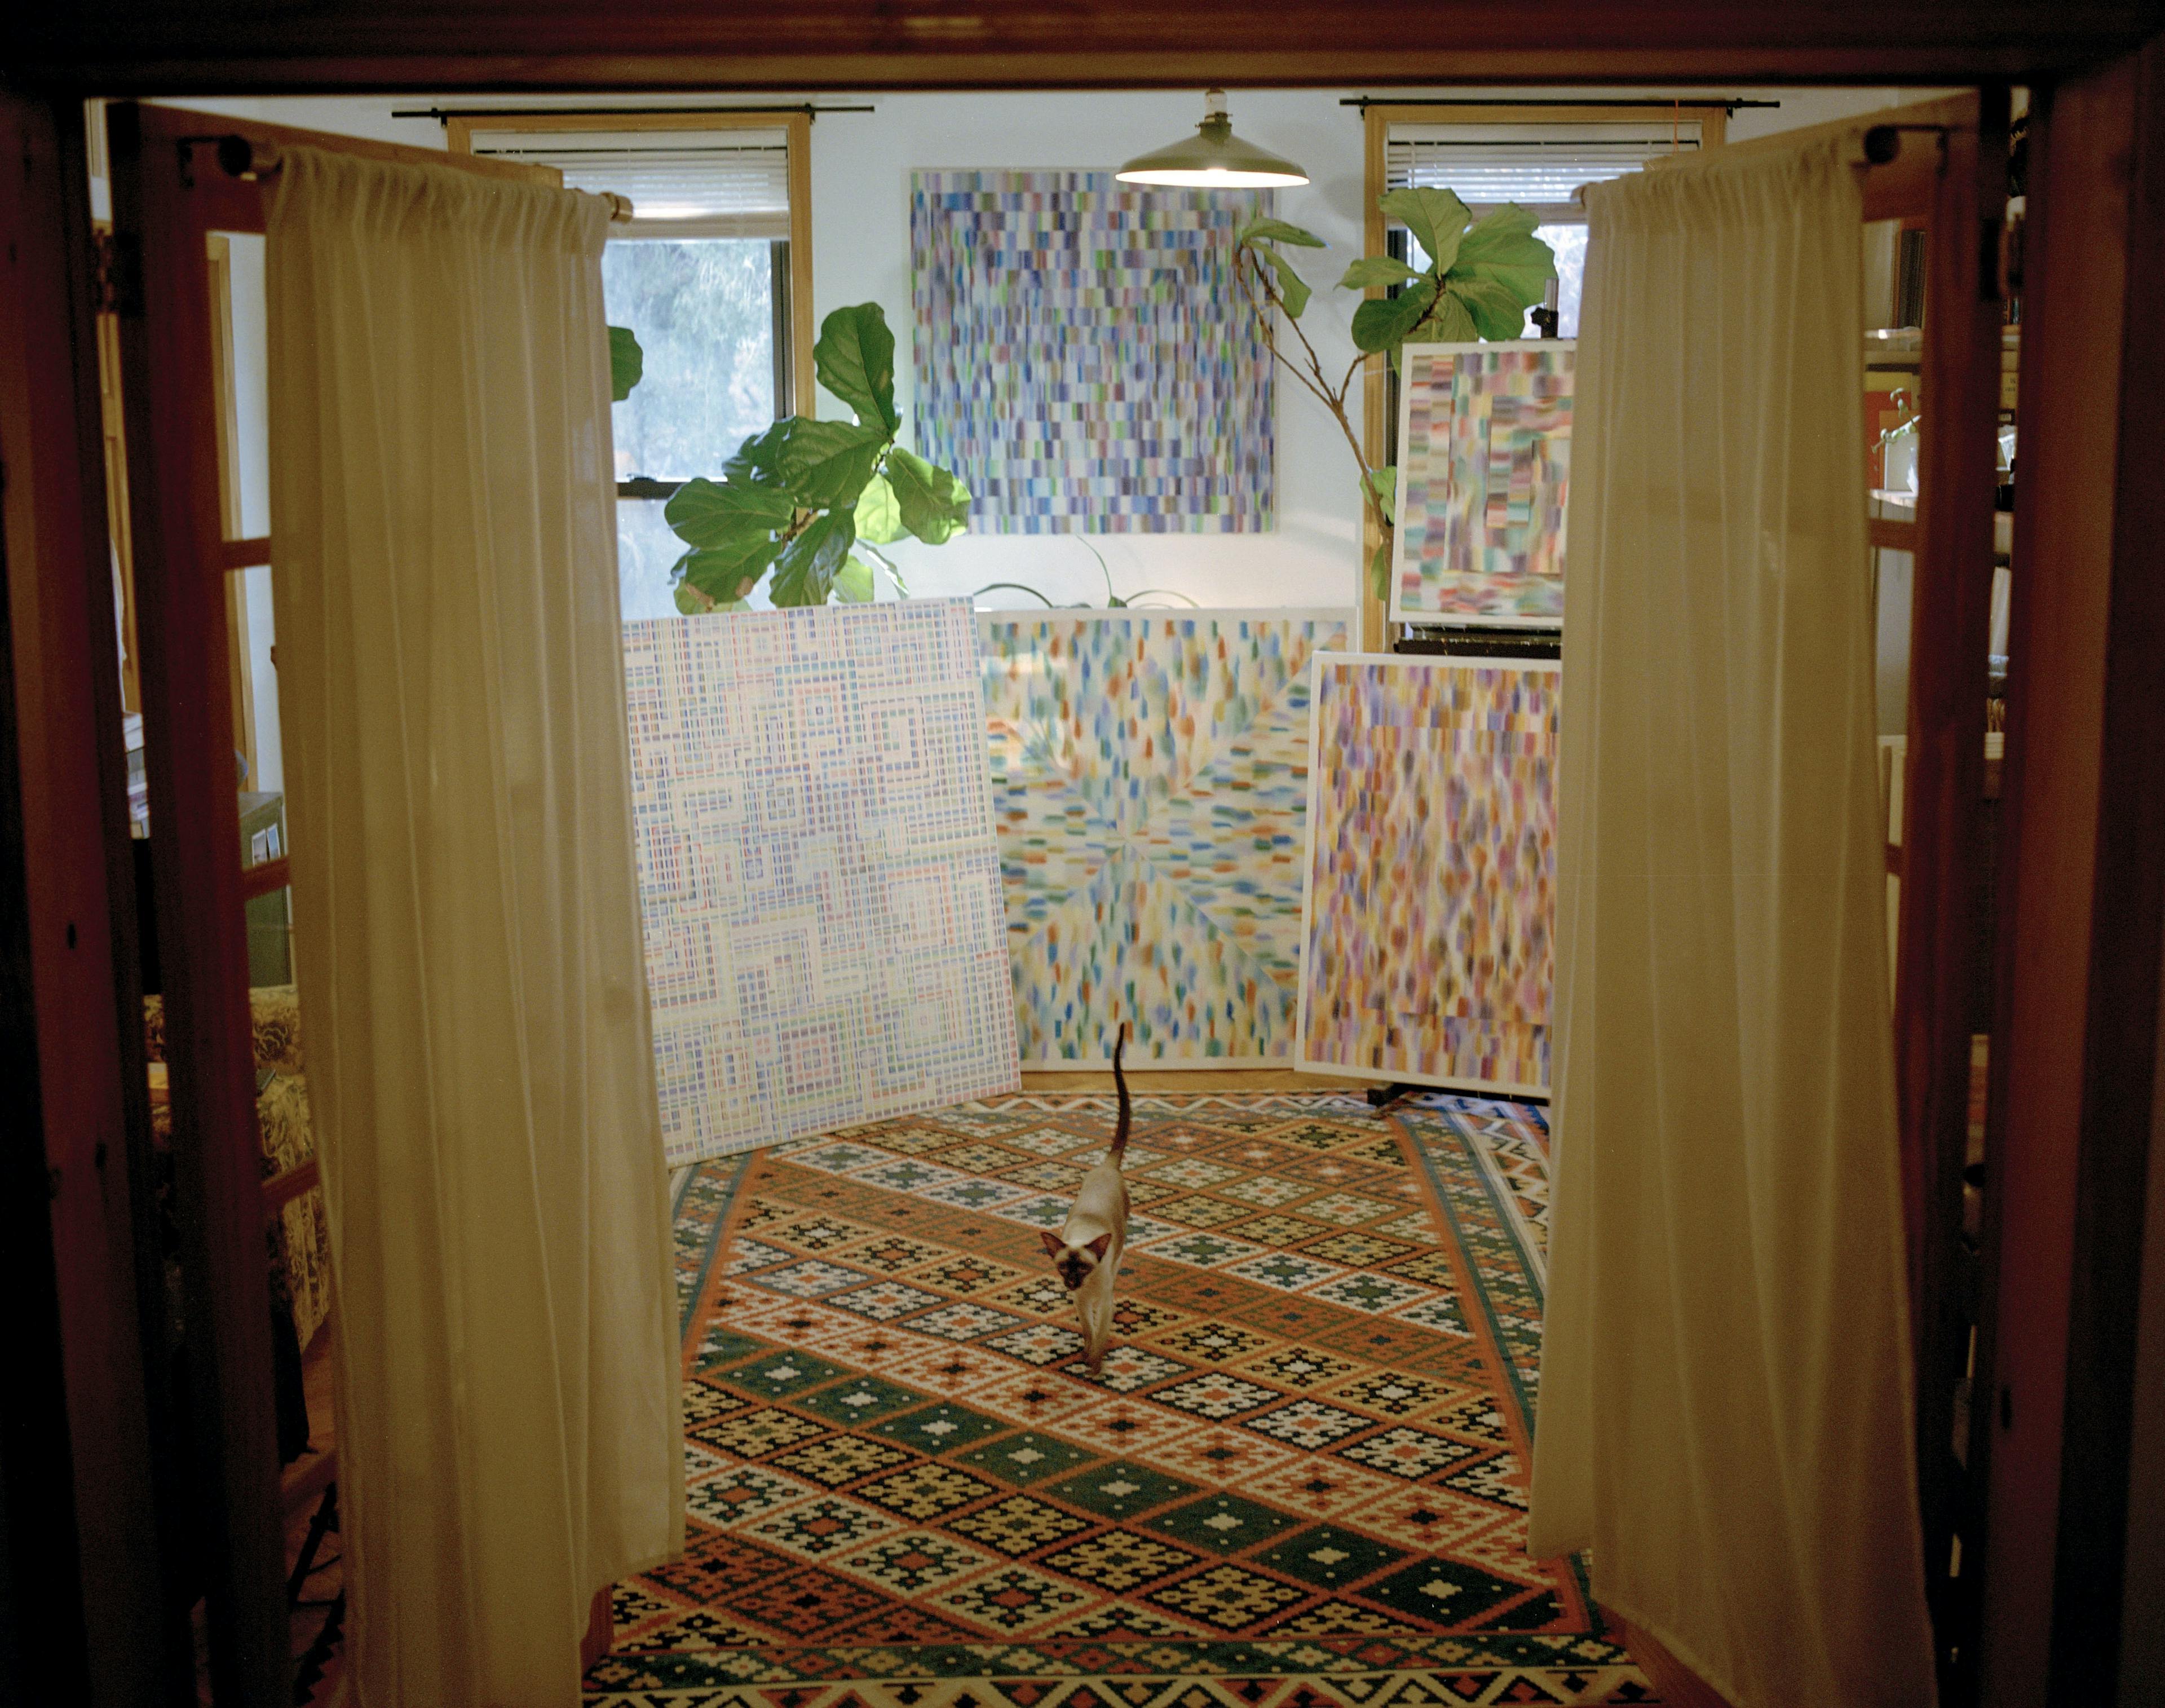 Artist Devon Reina's studio with paintings, a geometric carpet, and a cat walking towards open double doors.